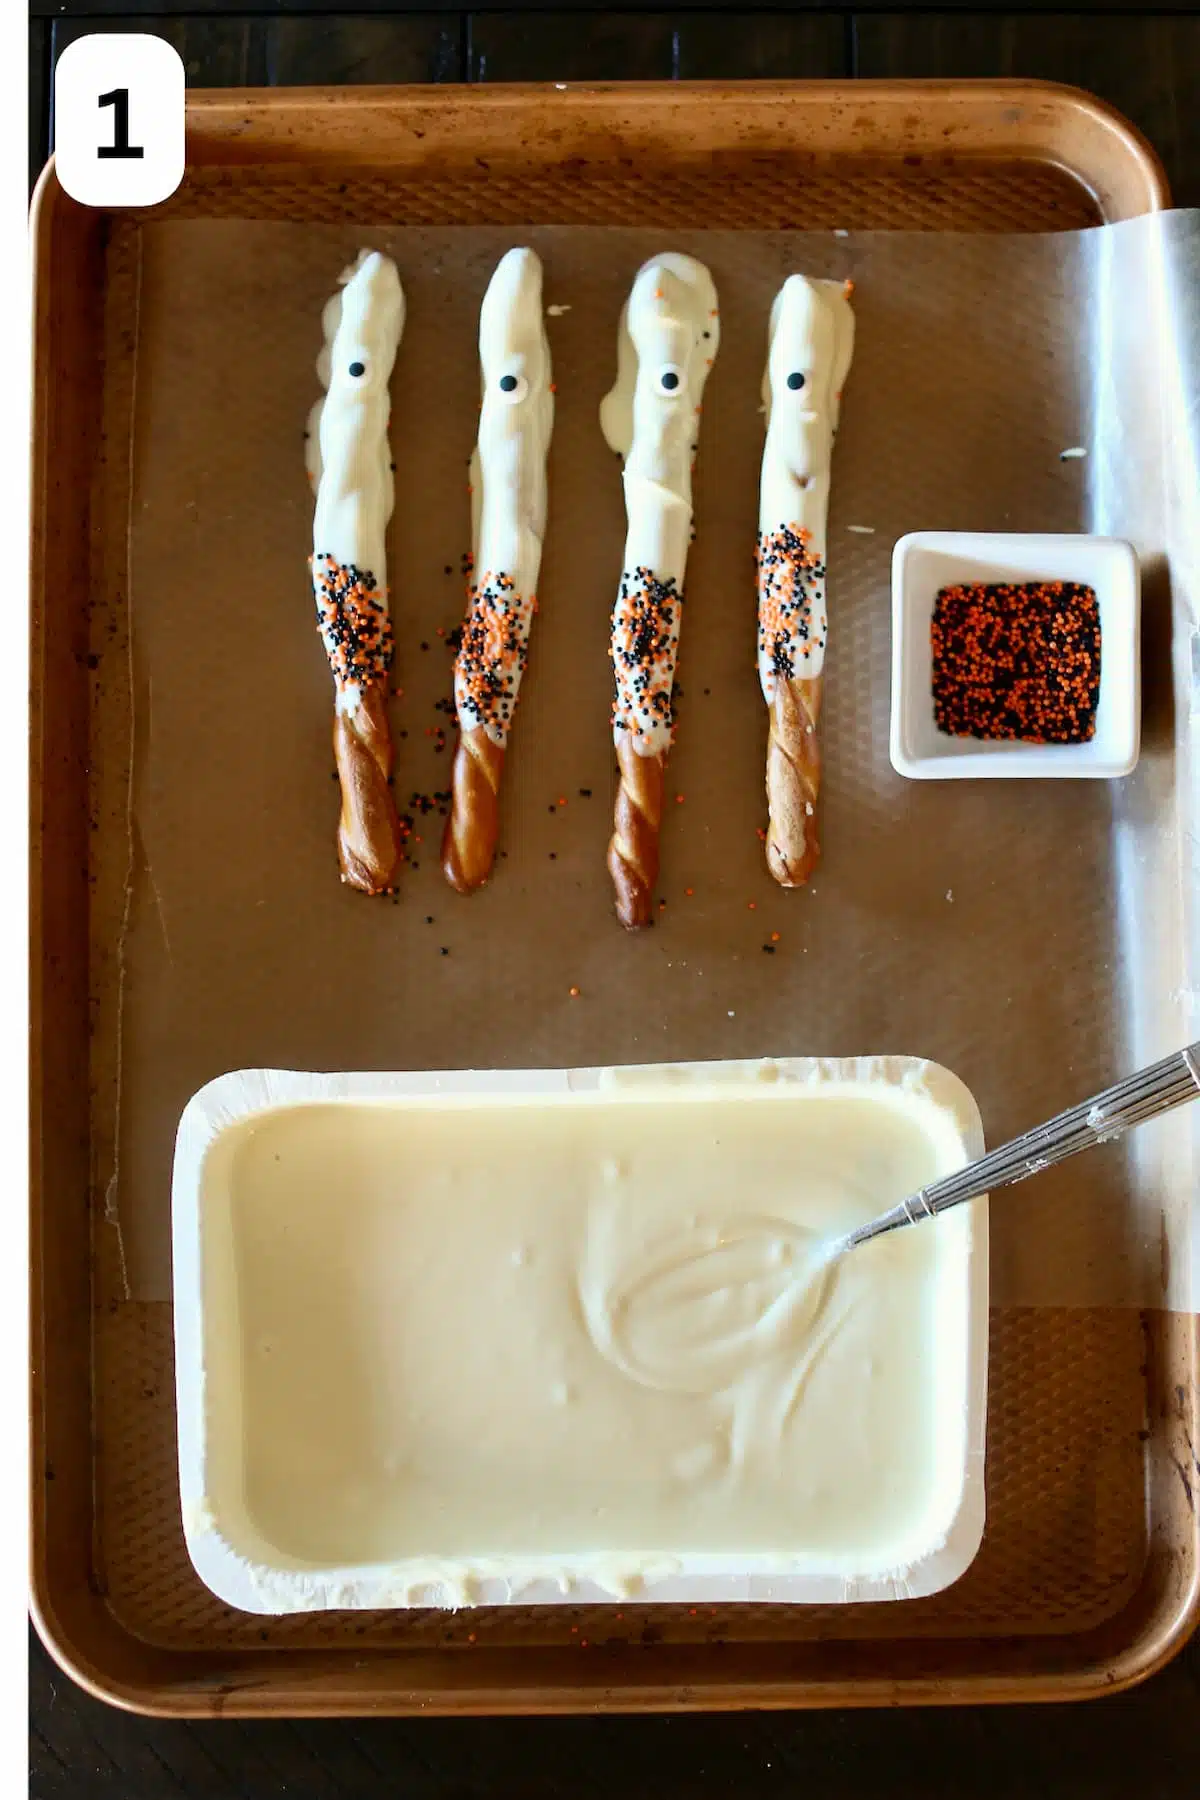 Stick pretzels are dipped in white chocolate and sprinkles with candy eyes.